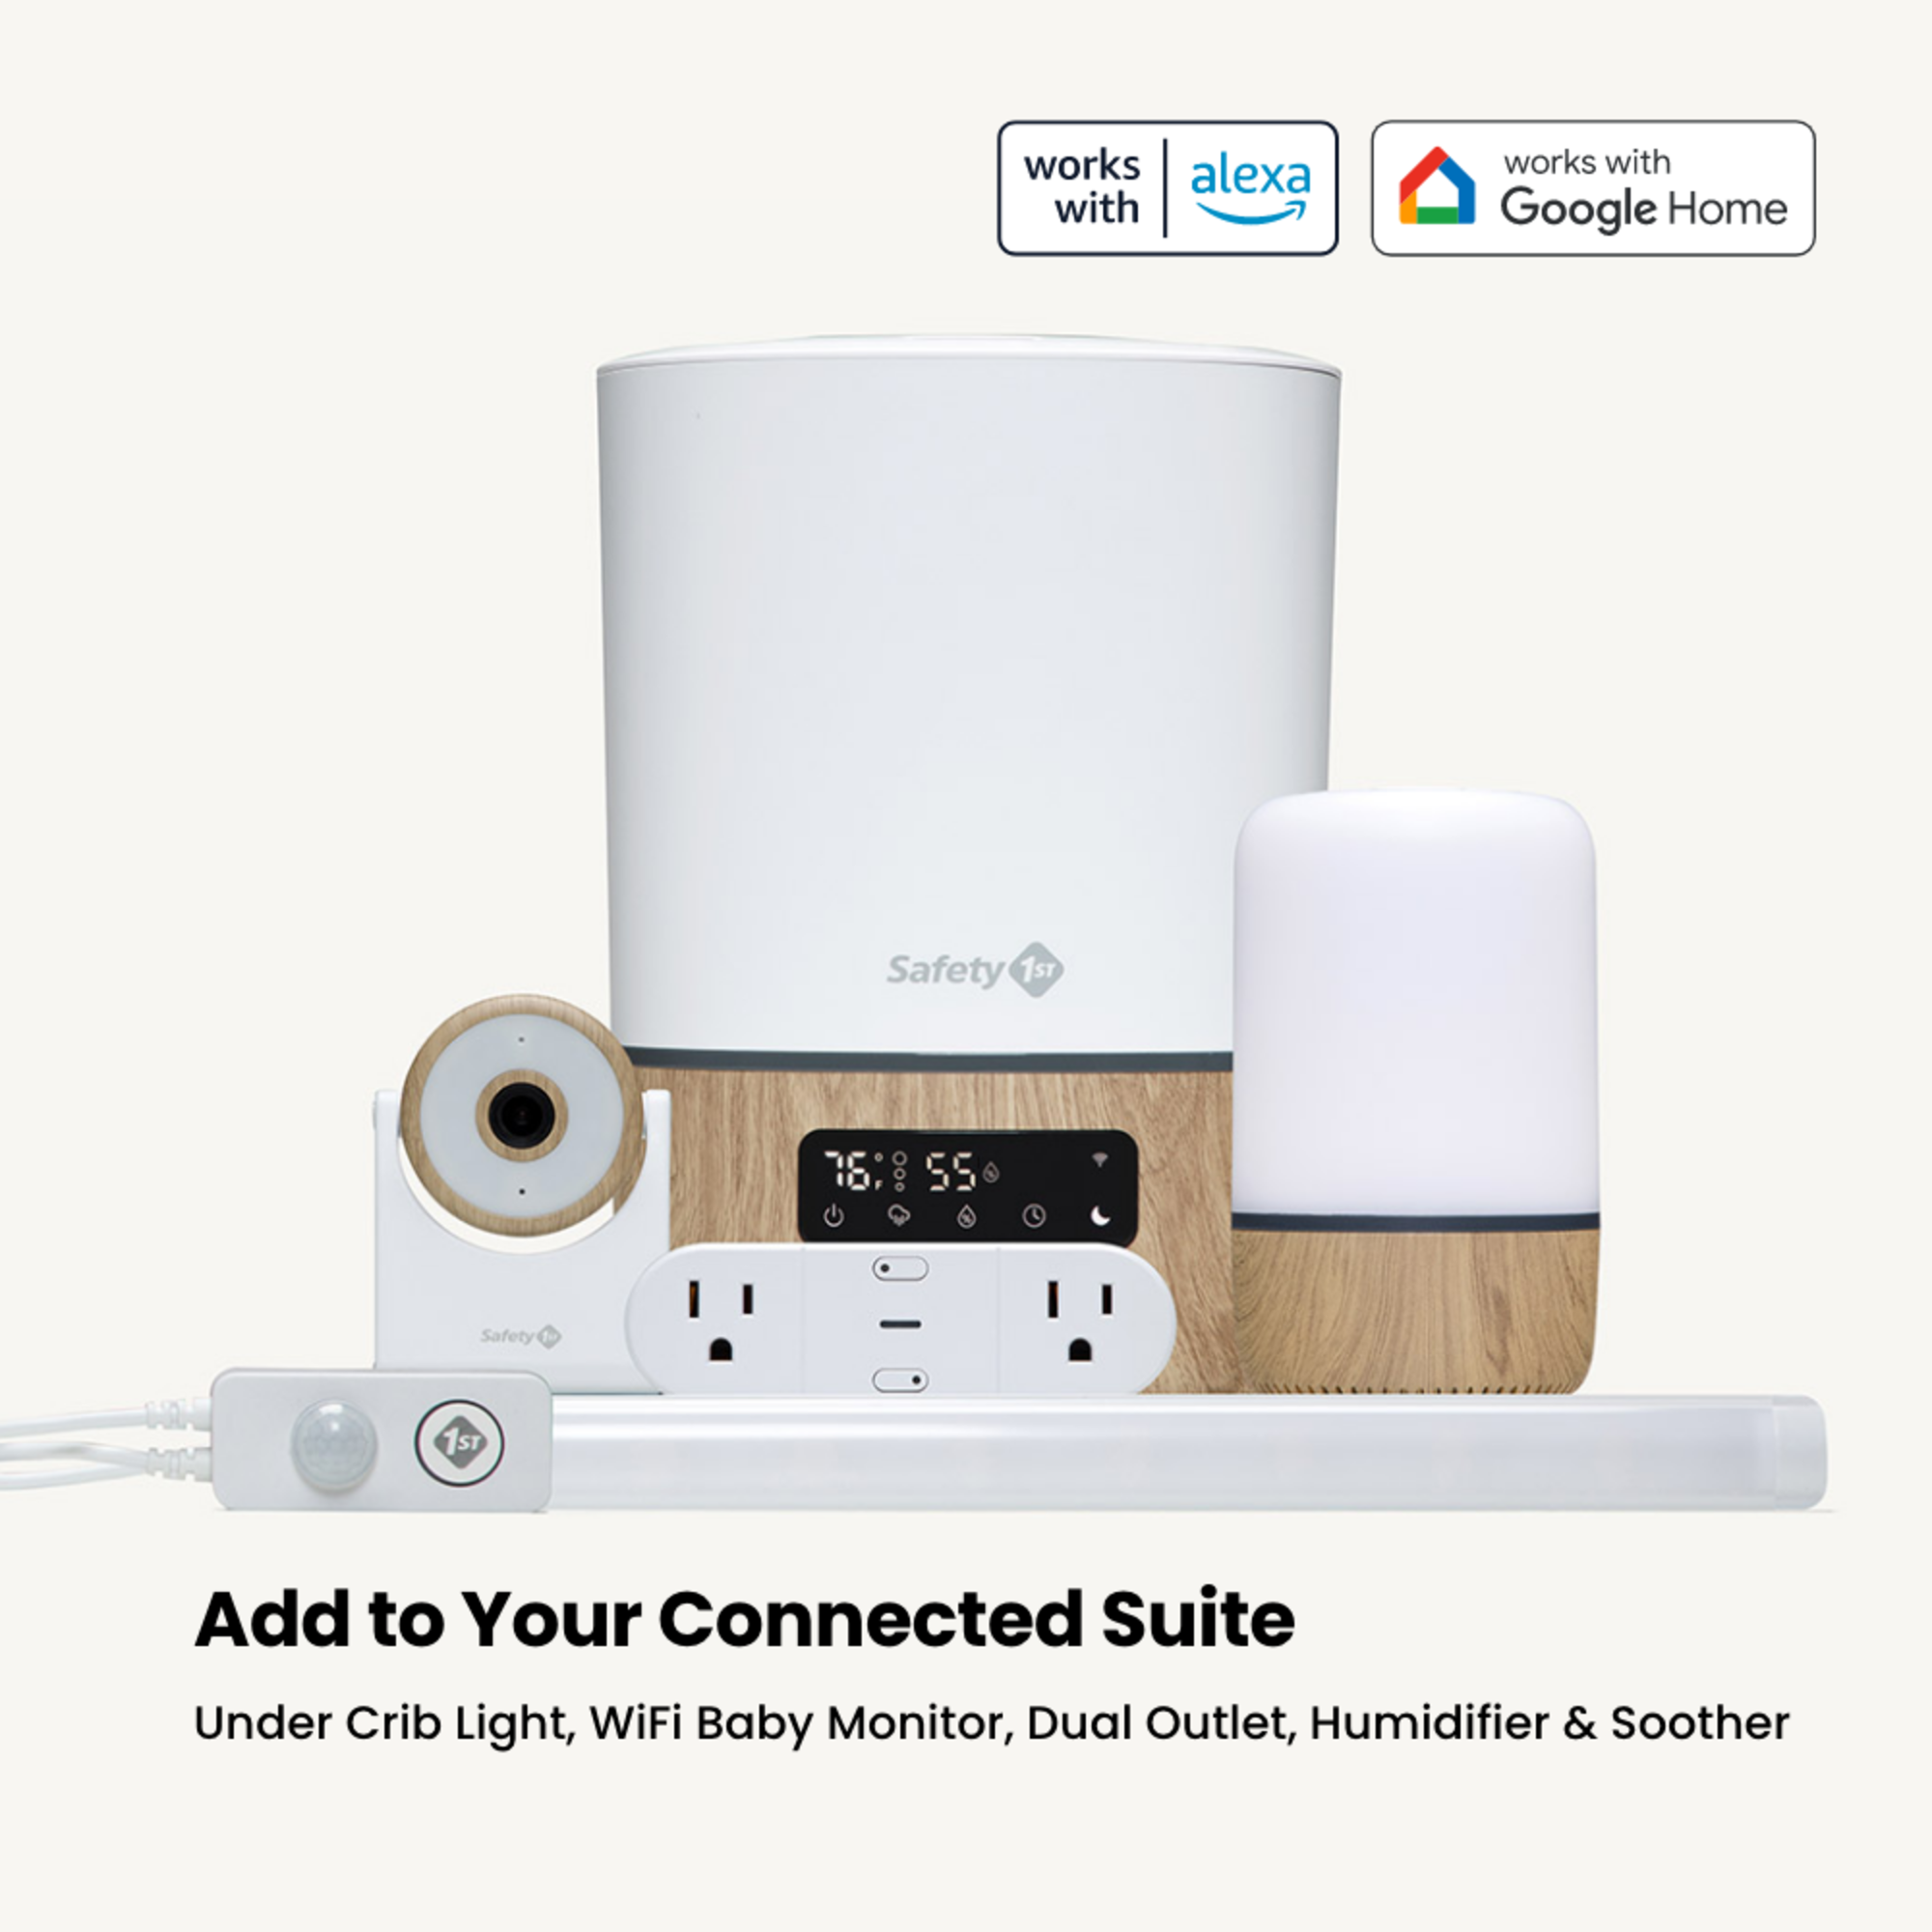 Shows suite of Connected Nursery products - Add to Your Connected Suite - Soother, Under Crib Light, Dual Outlet, Humidifier & WiFi Baby Monitor